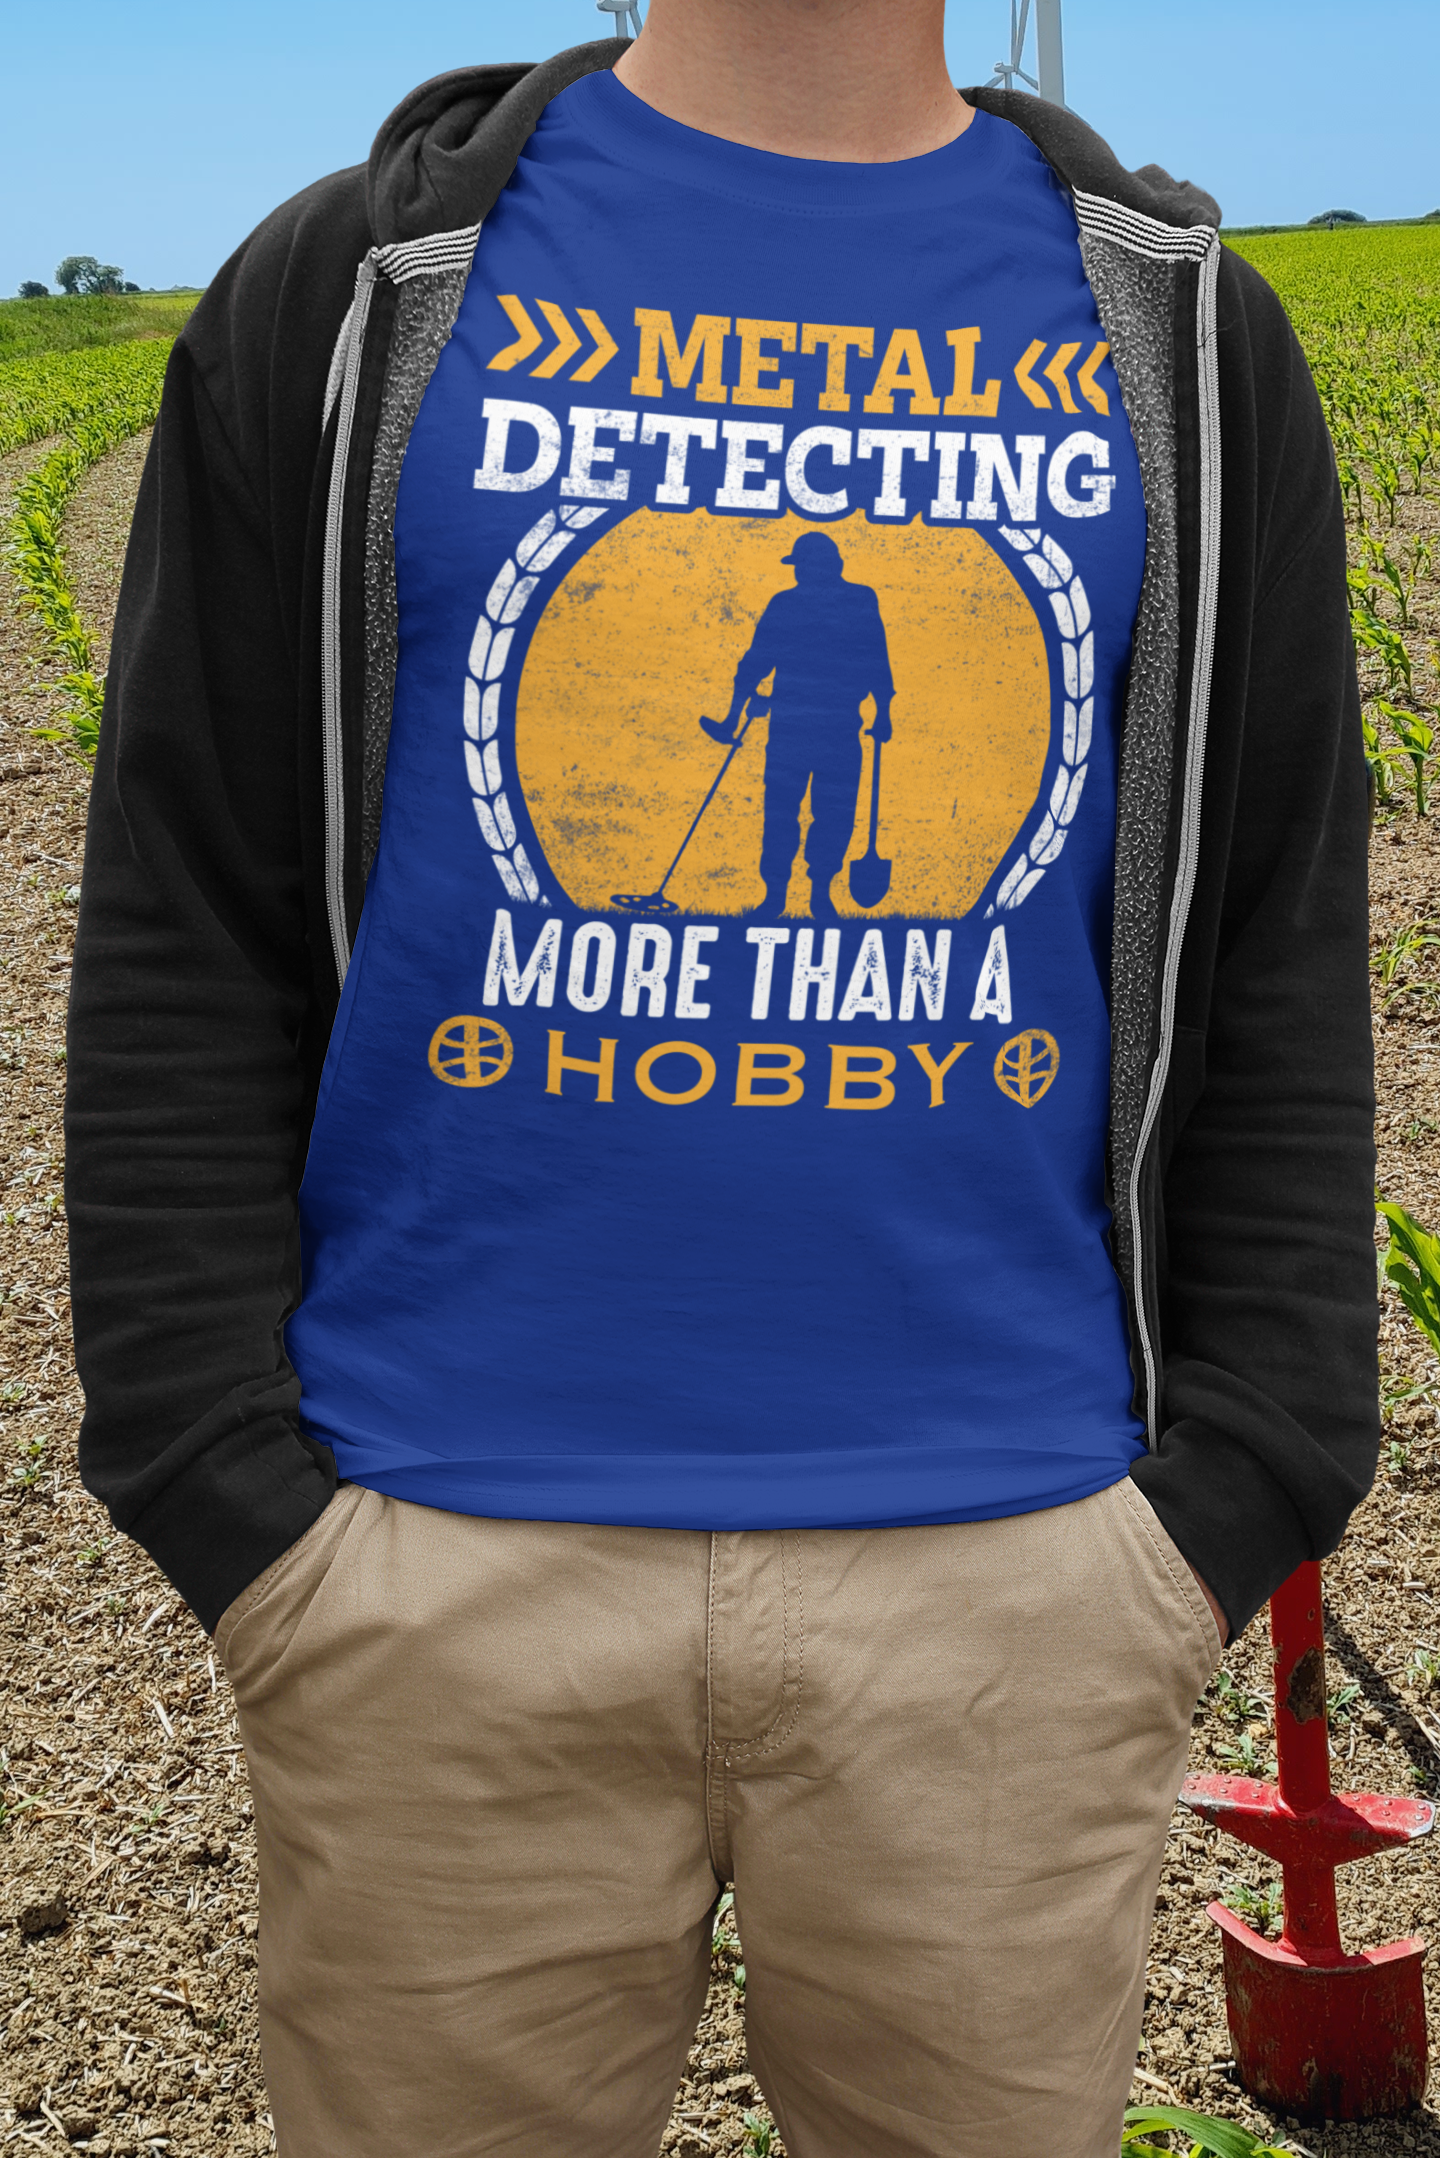 Metal detecting, more than a hobby.